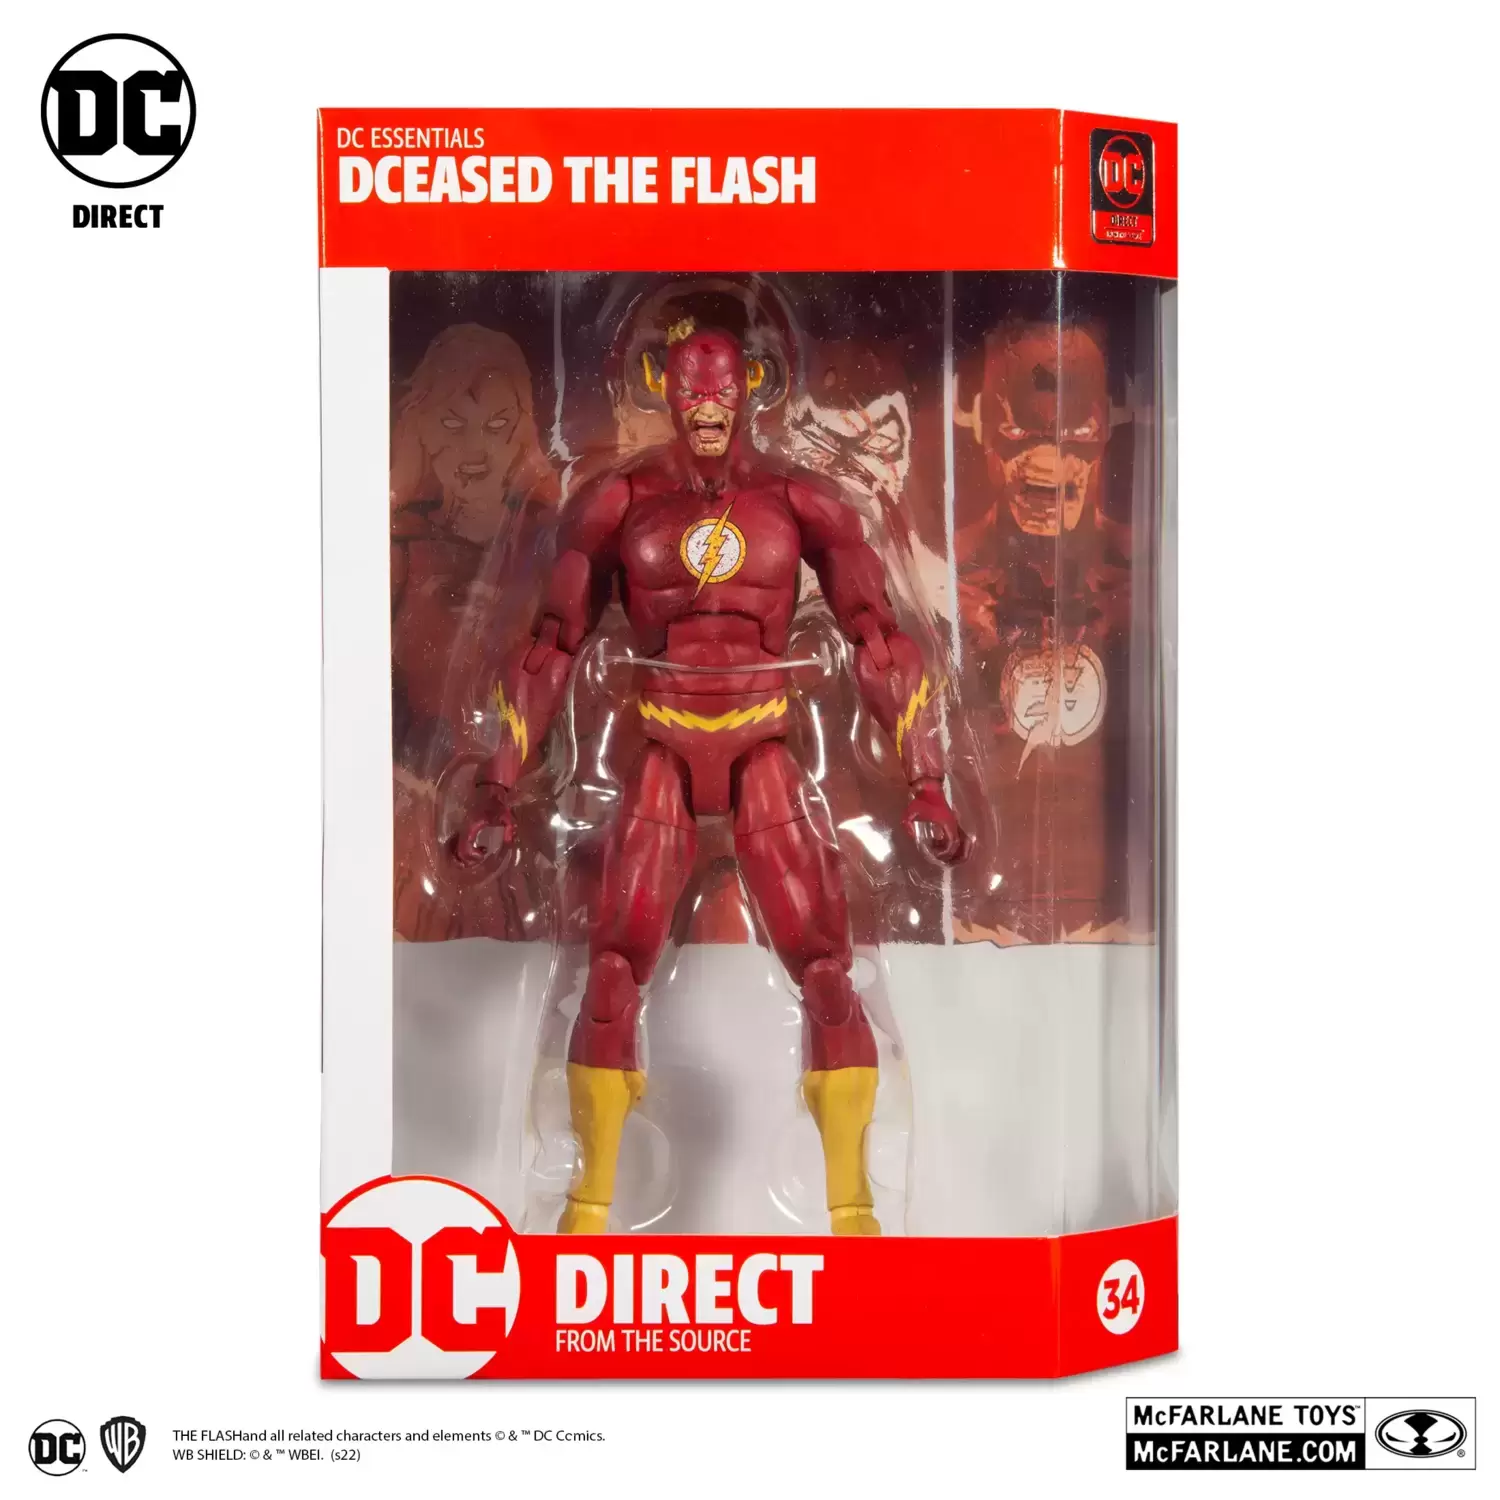 DC Essentials - DC Collectibles - DCeased The Flash - DC Direct